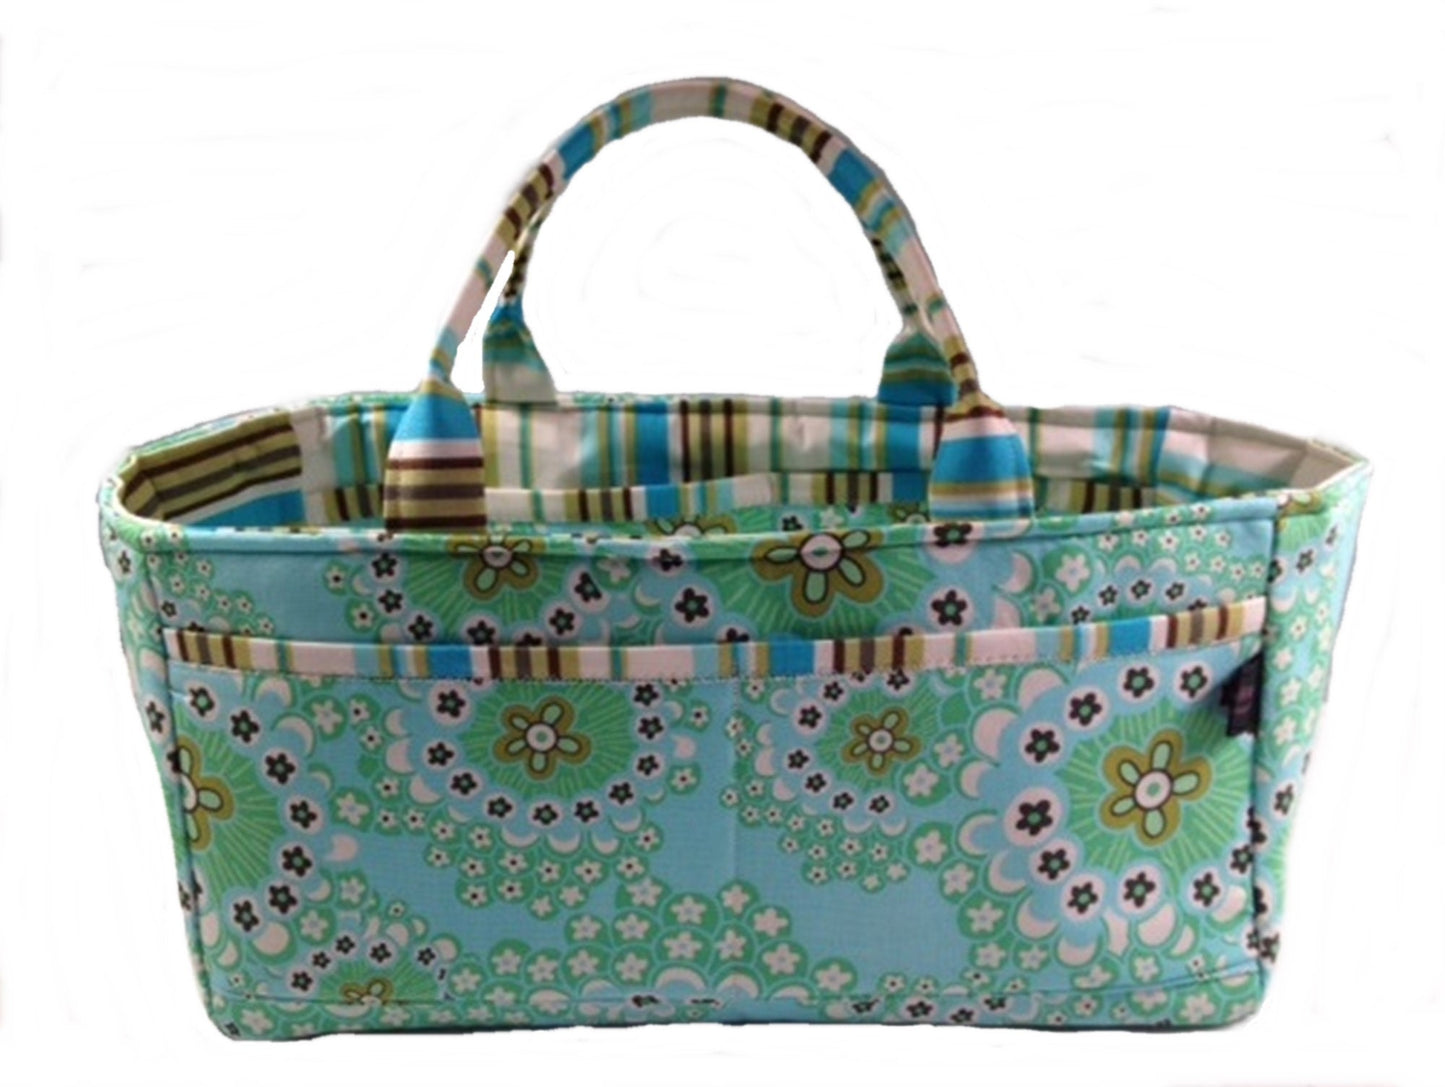 Scrapbooking Caddy Storage Tote Craft Sewing Tote Amy Butler Daisy Chain fabric